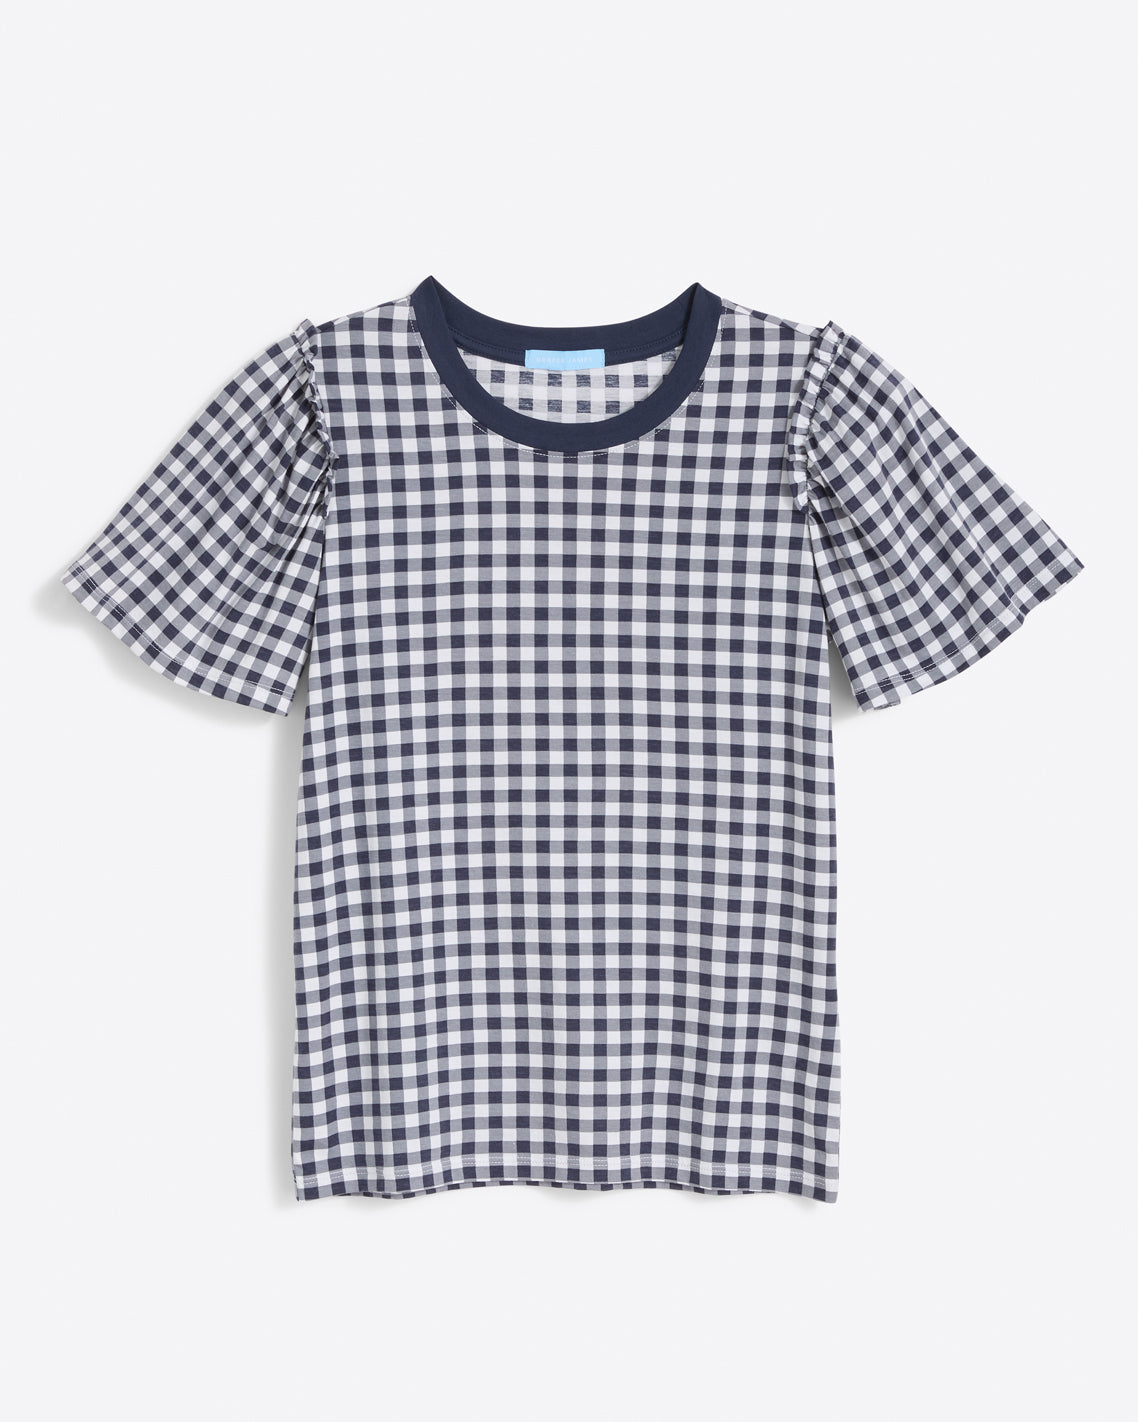 Short Sleeve Easy Knit Top in Gingham